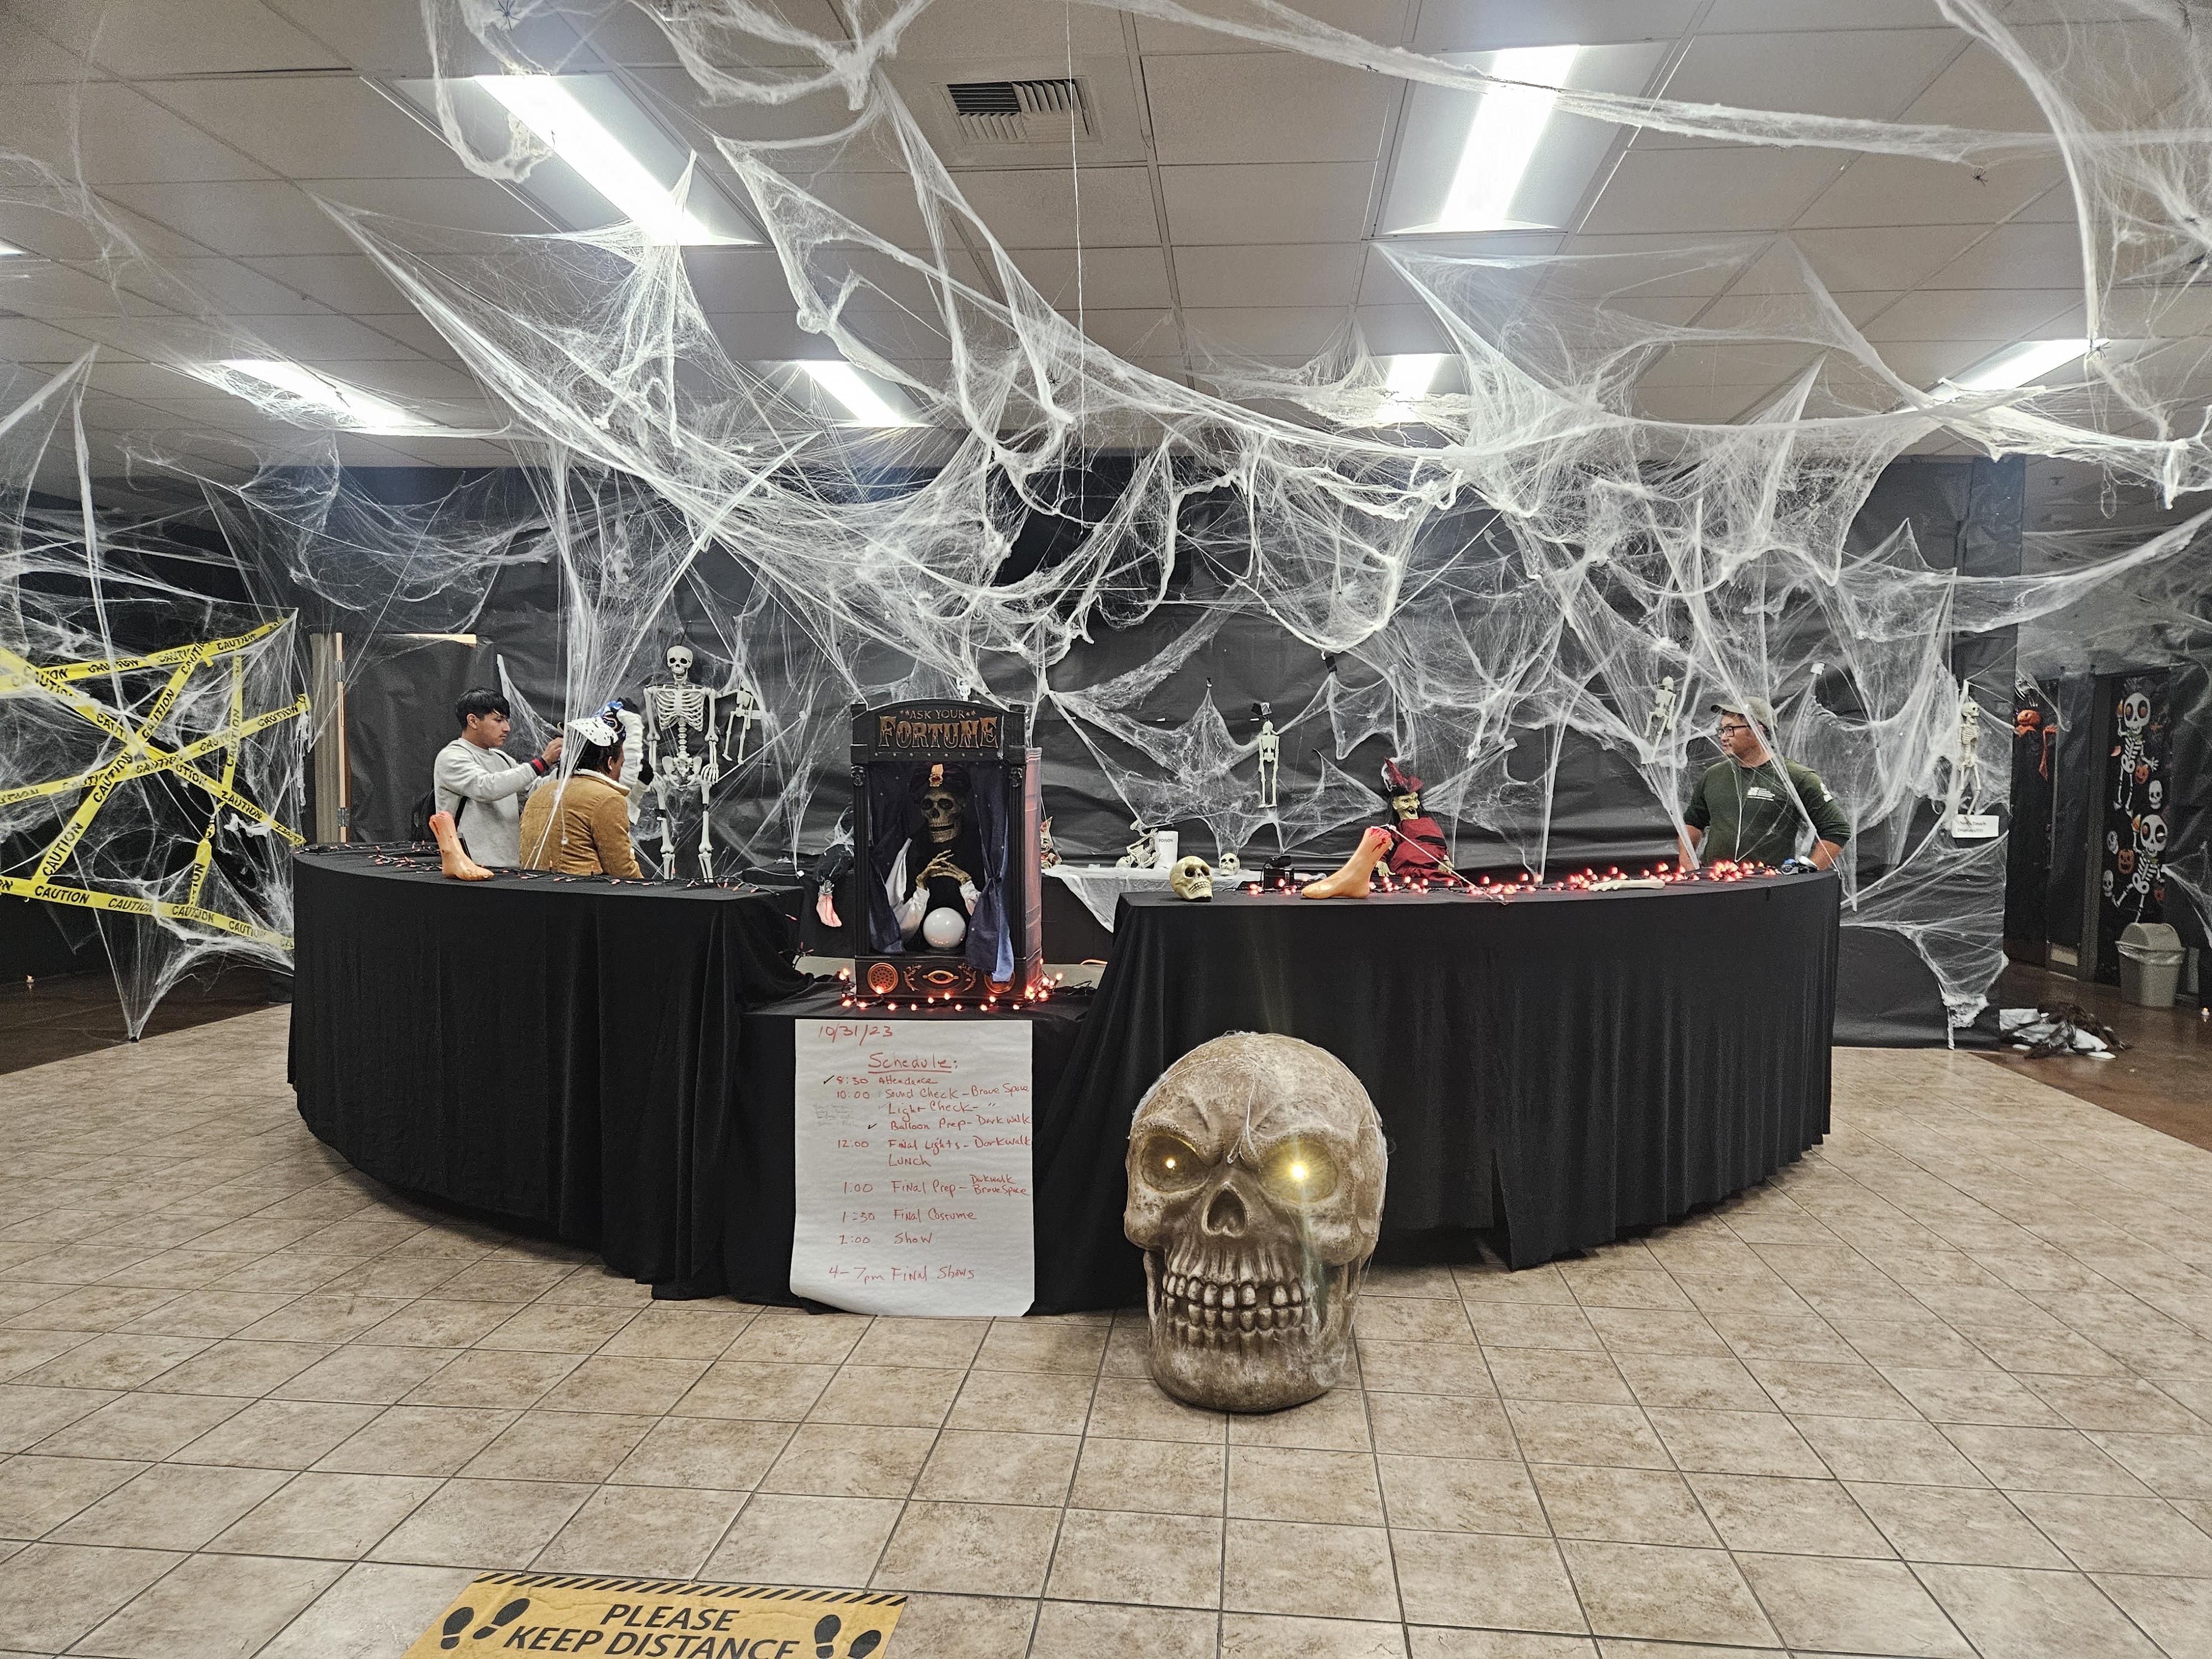 the reception area decorated with cobwebs and spooky decor